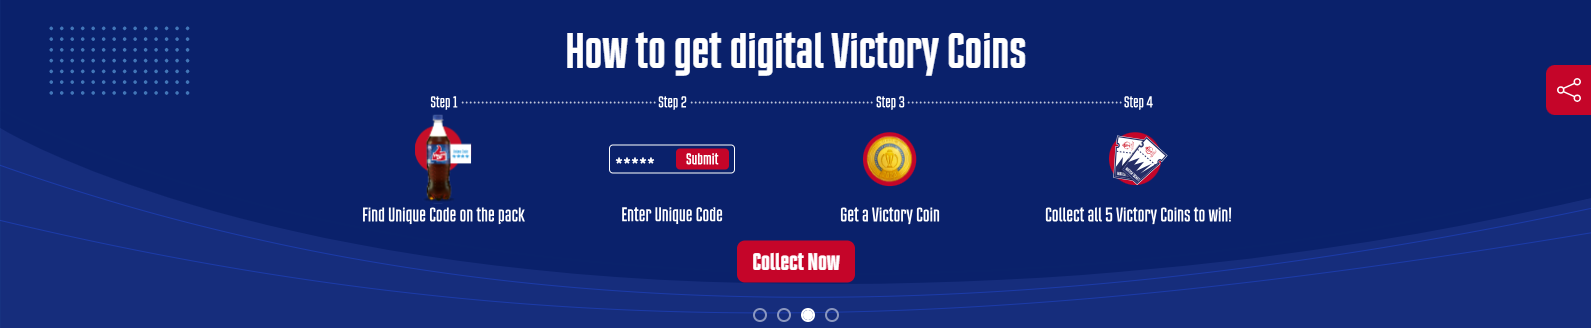 Thums Up ICC World Cup 2023: Win Free Match Tickets, Caps